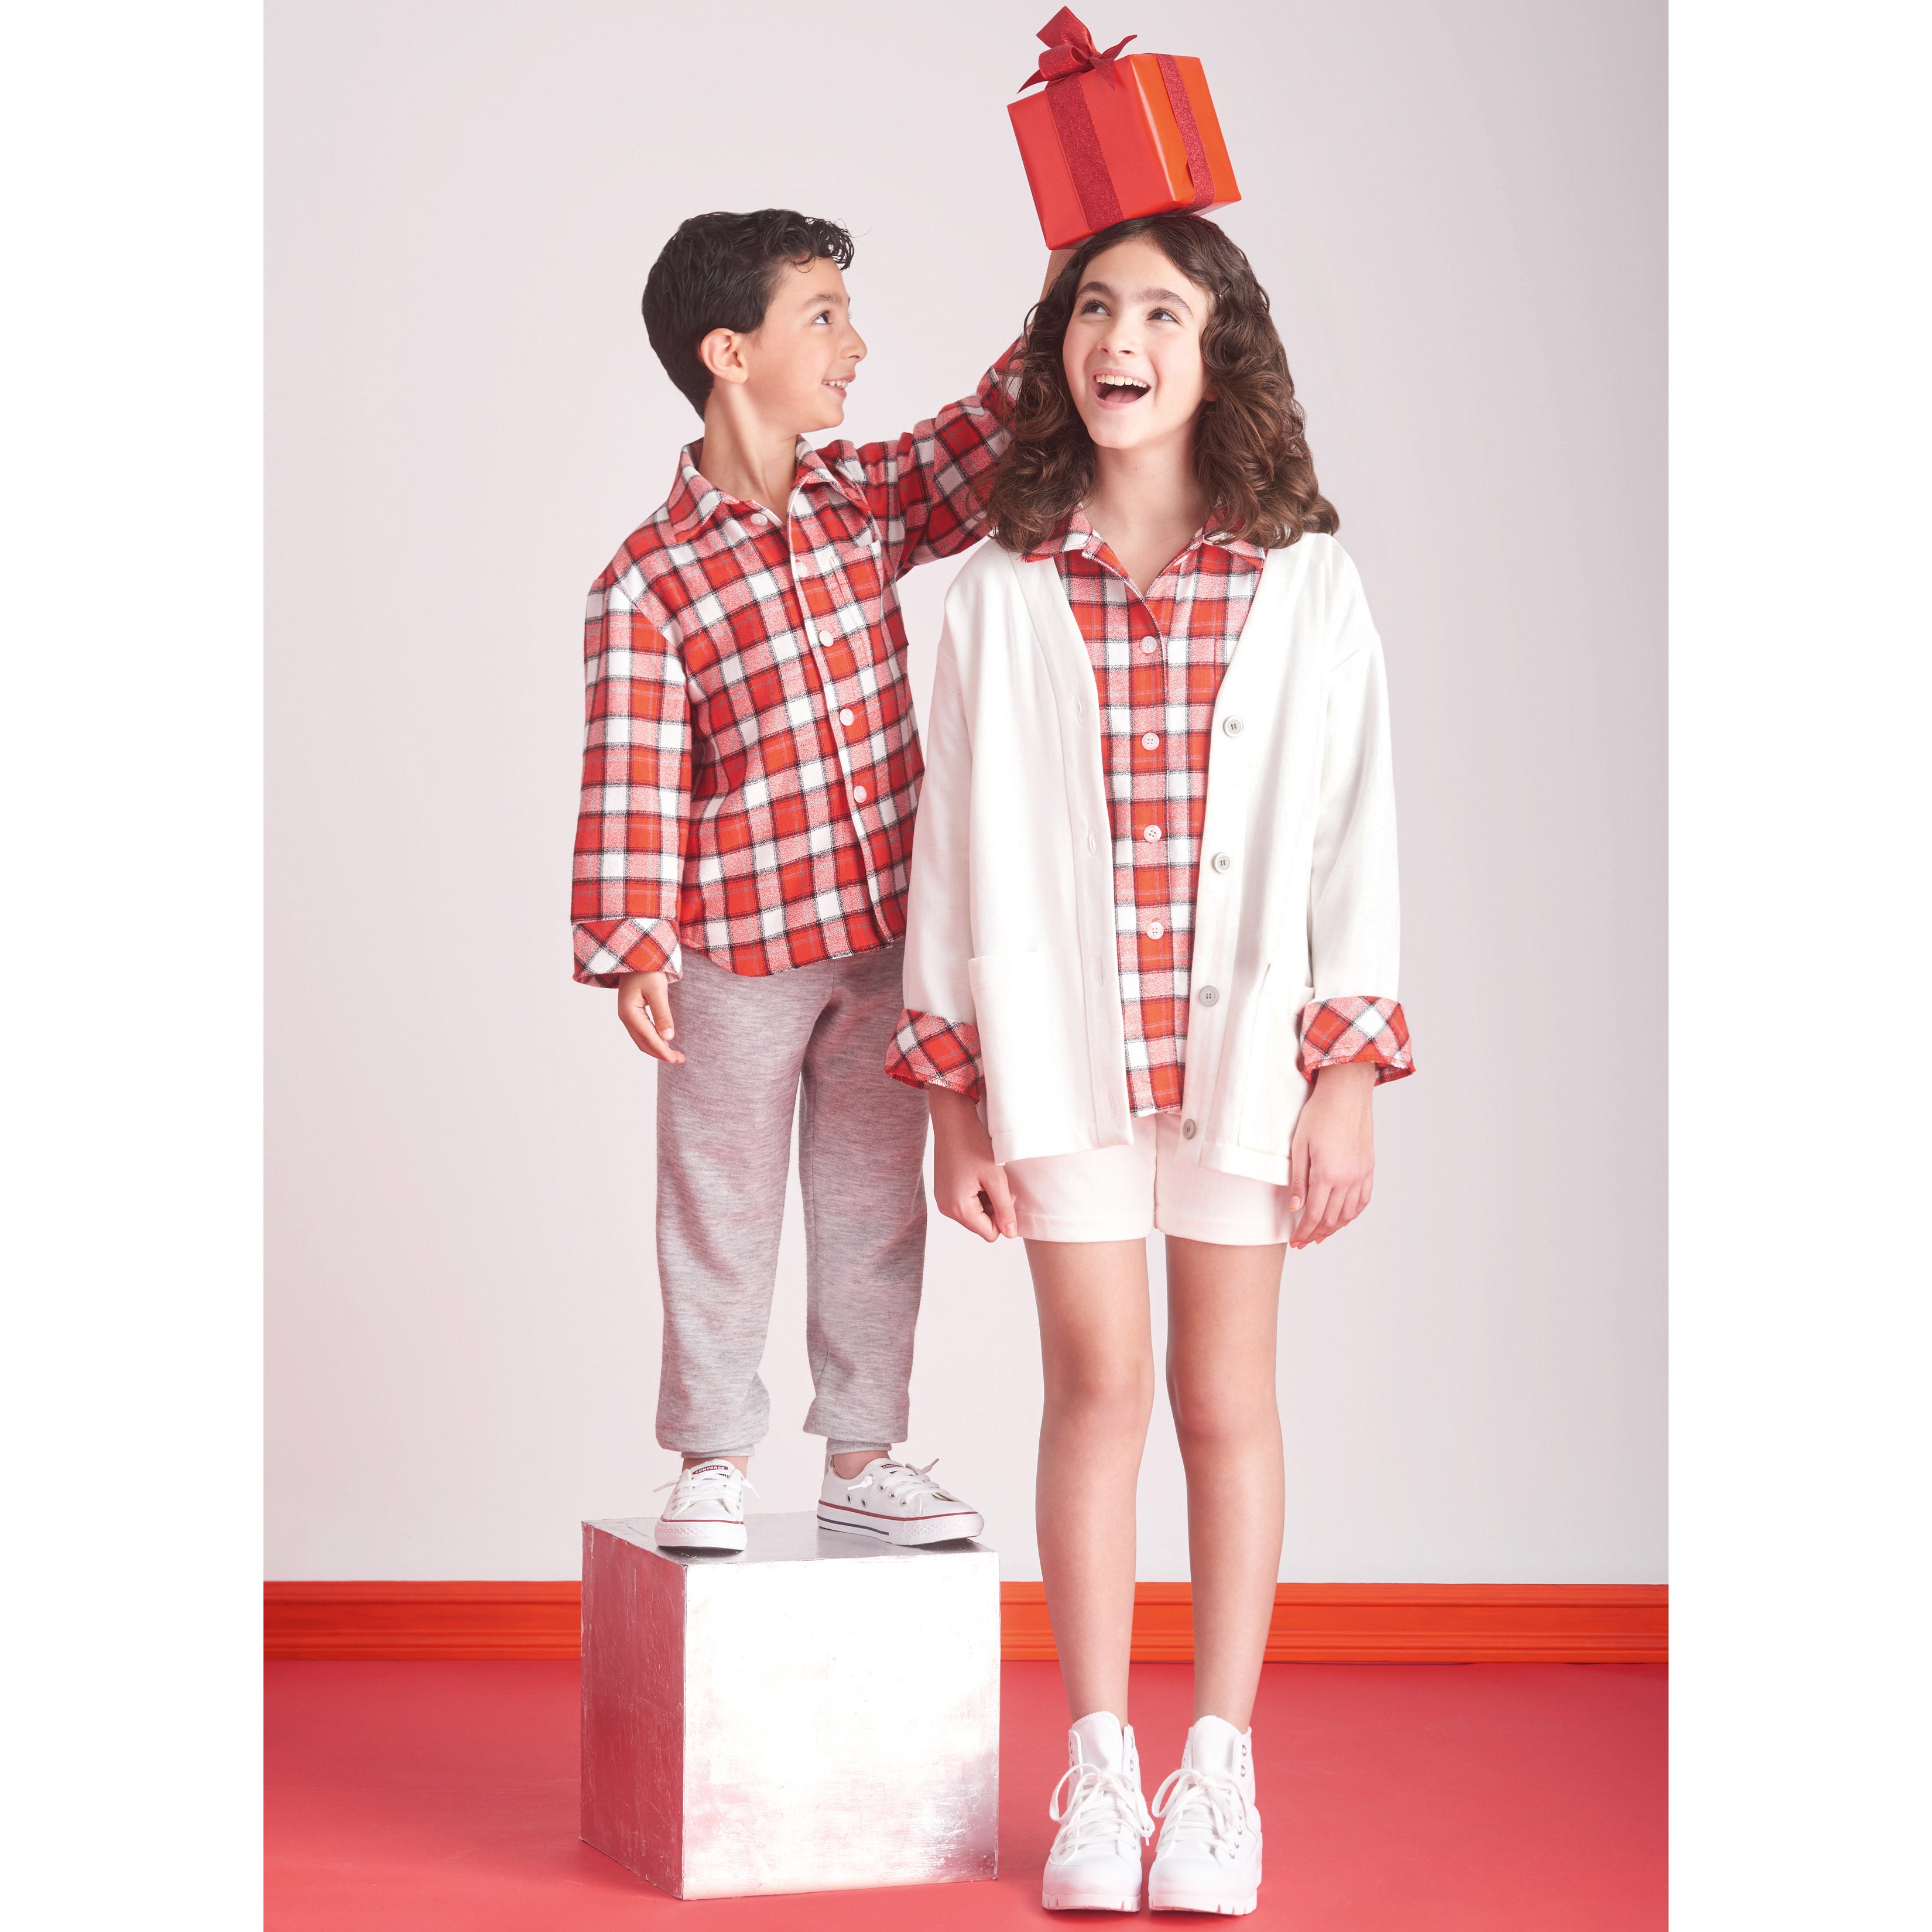 Simplicity pattern 9691 Girls', Boys' and Adults' Loungewear from Jaycotts Sewing Supplies